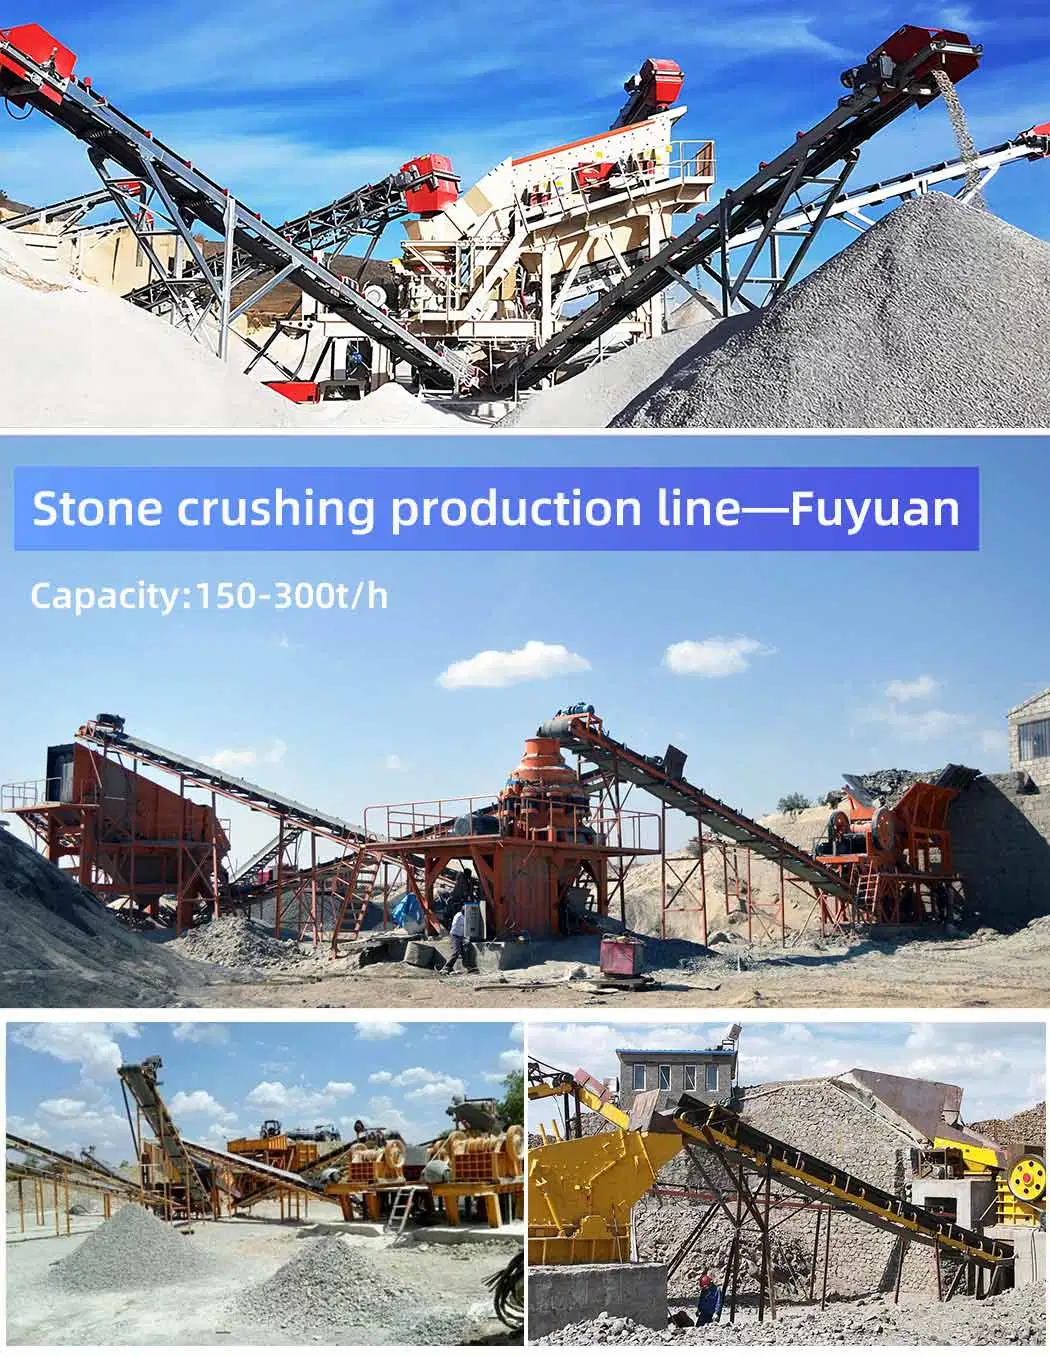 200 Tph Mining Rock Jaw Crushing Plant Price, Stone Crushing Production Line, Aggregate Stone Crusher Equipment for Quarry